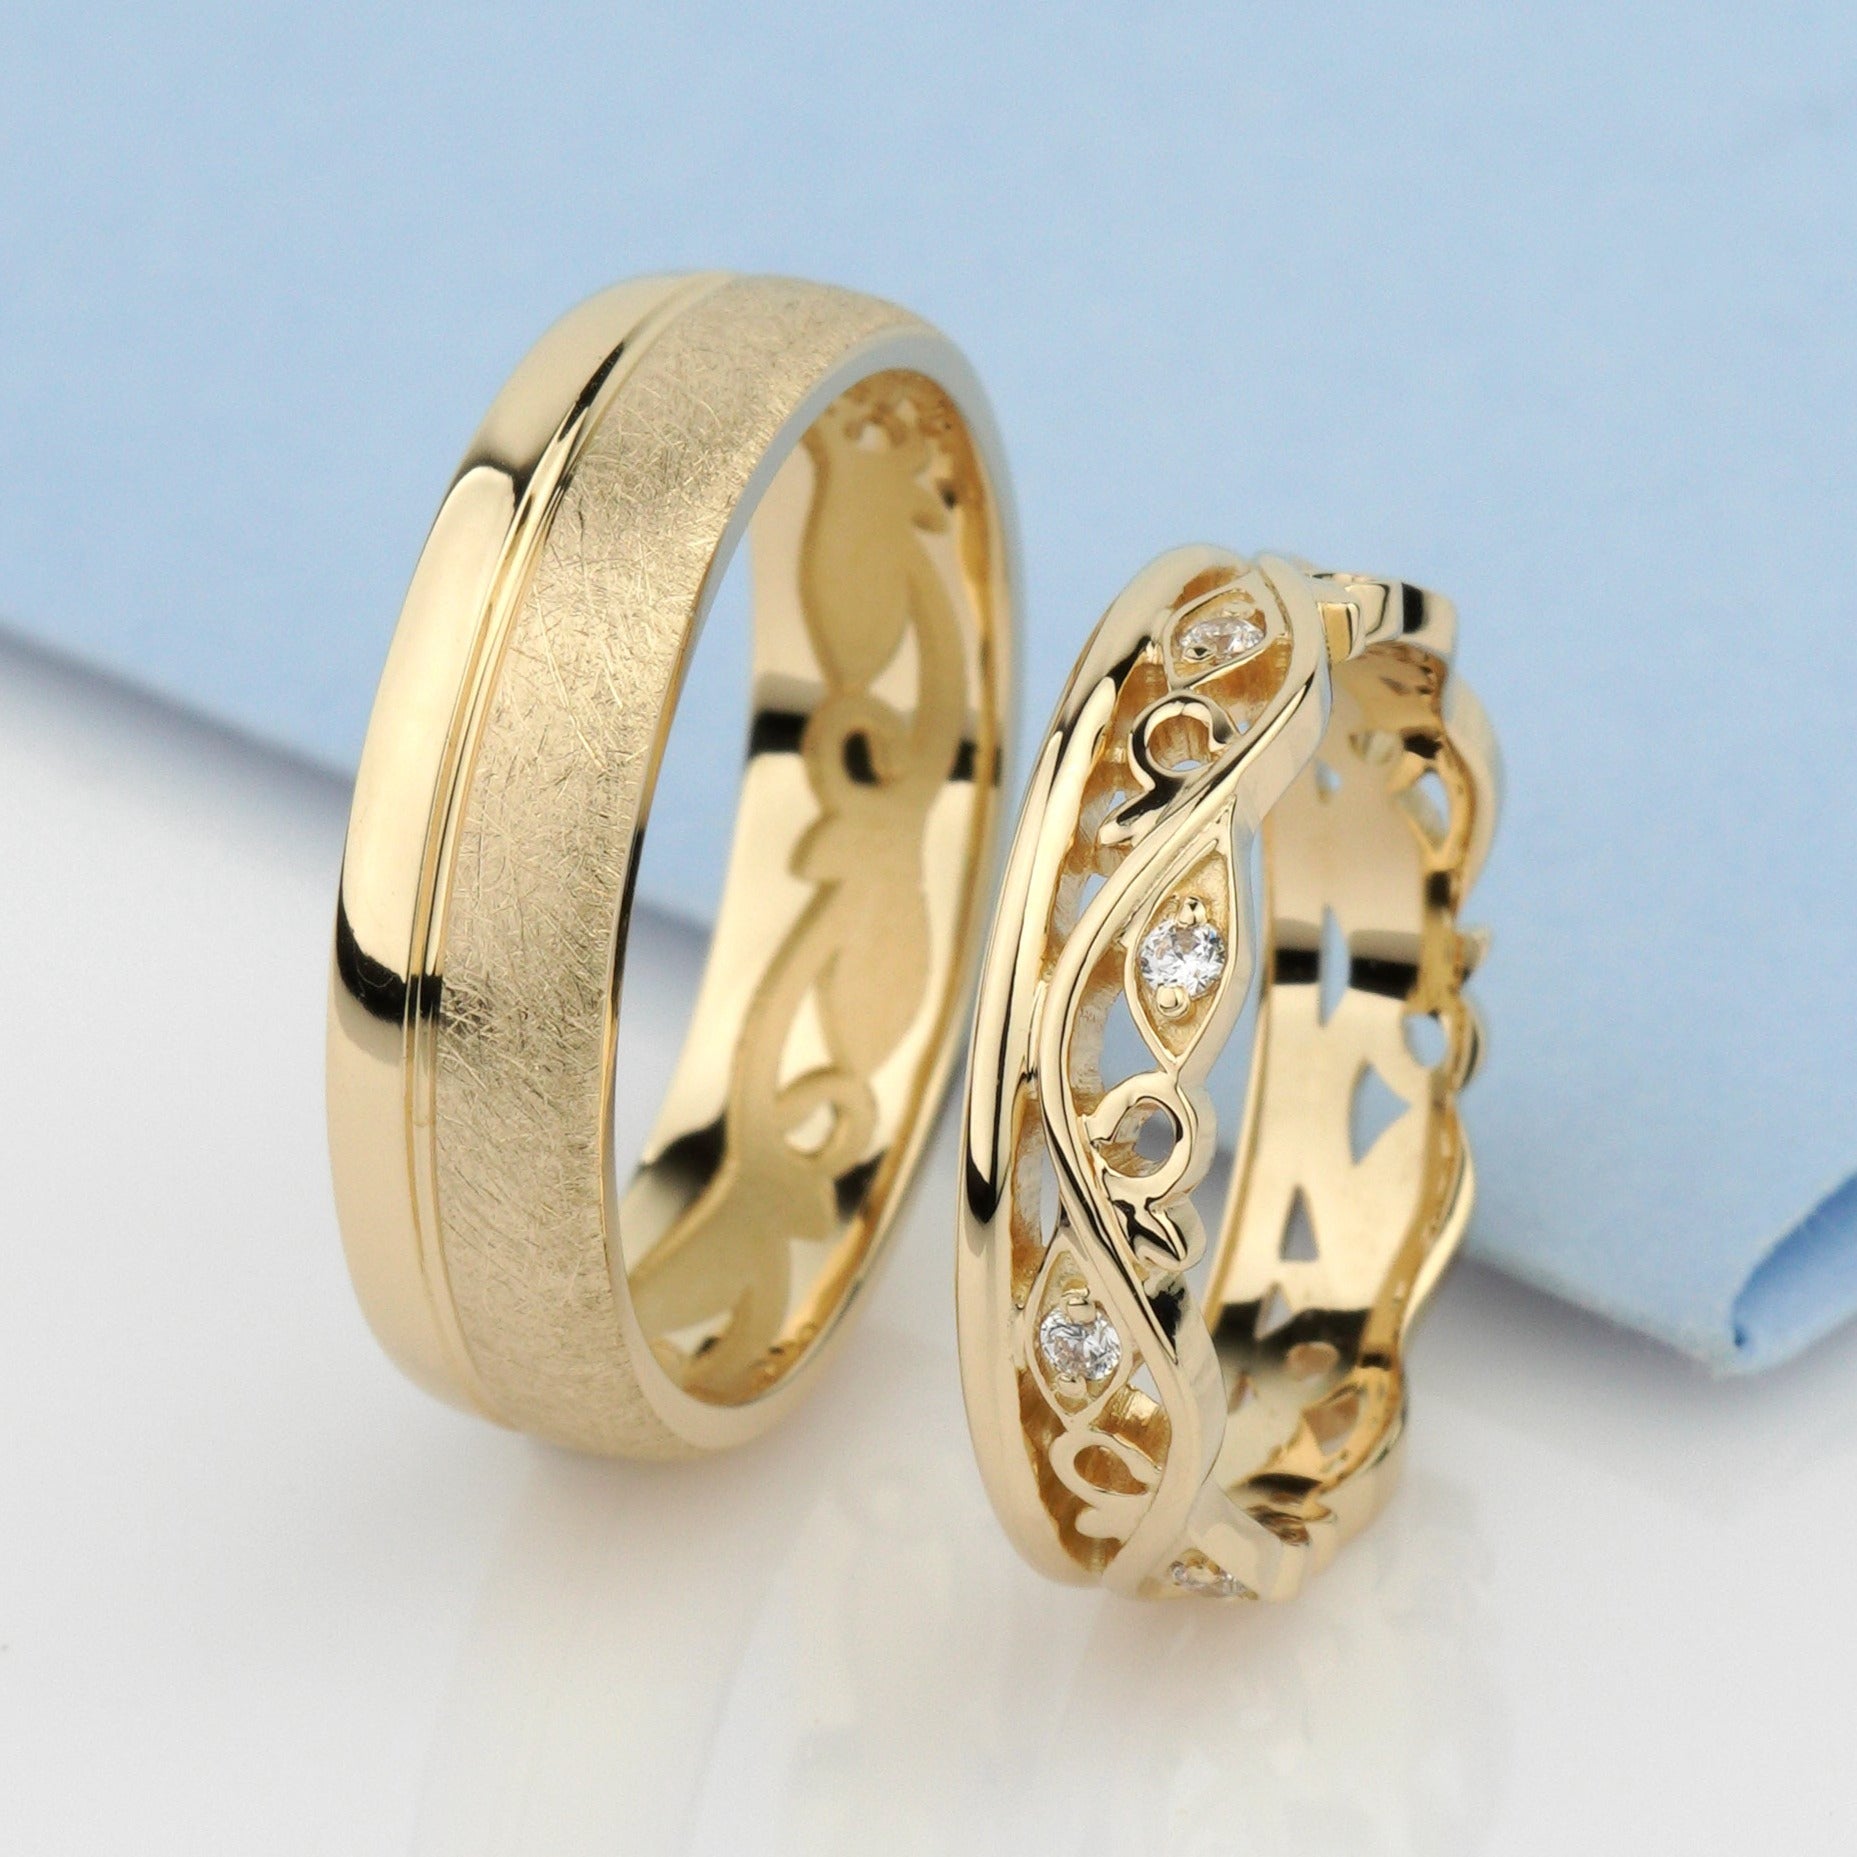 Matching wedding rings set. His and hers bands. Couple wedding bands. Unique gold bands.Floral wedding bands.Gold leaf and vine wedding band. Nature wedding rings. Unique rings set